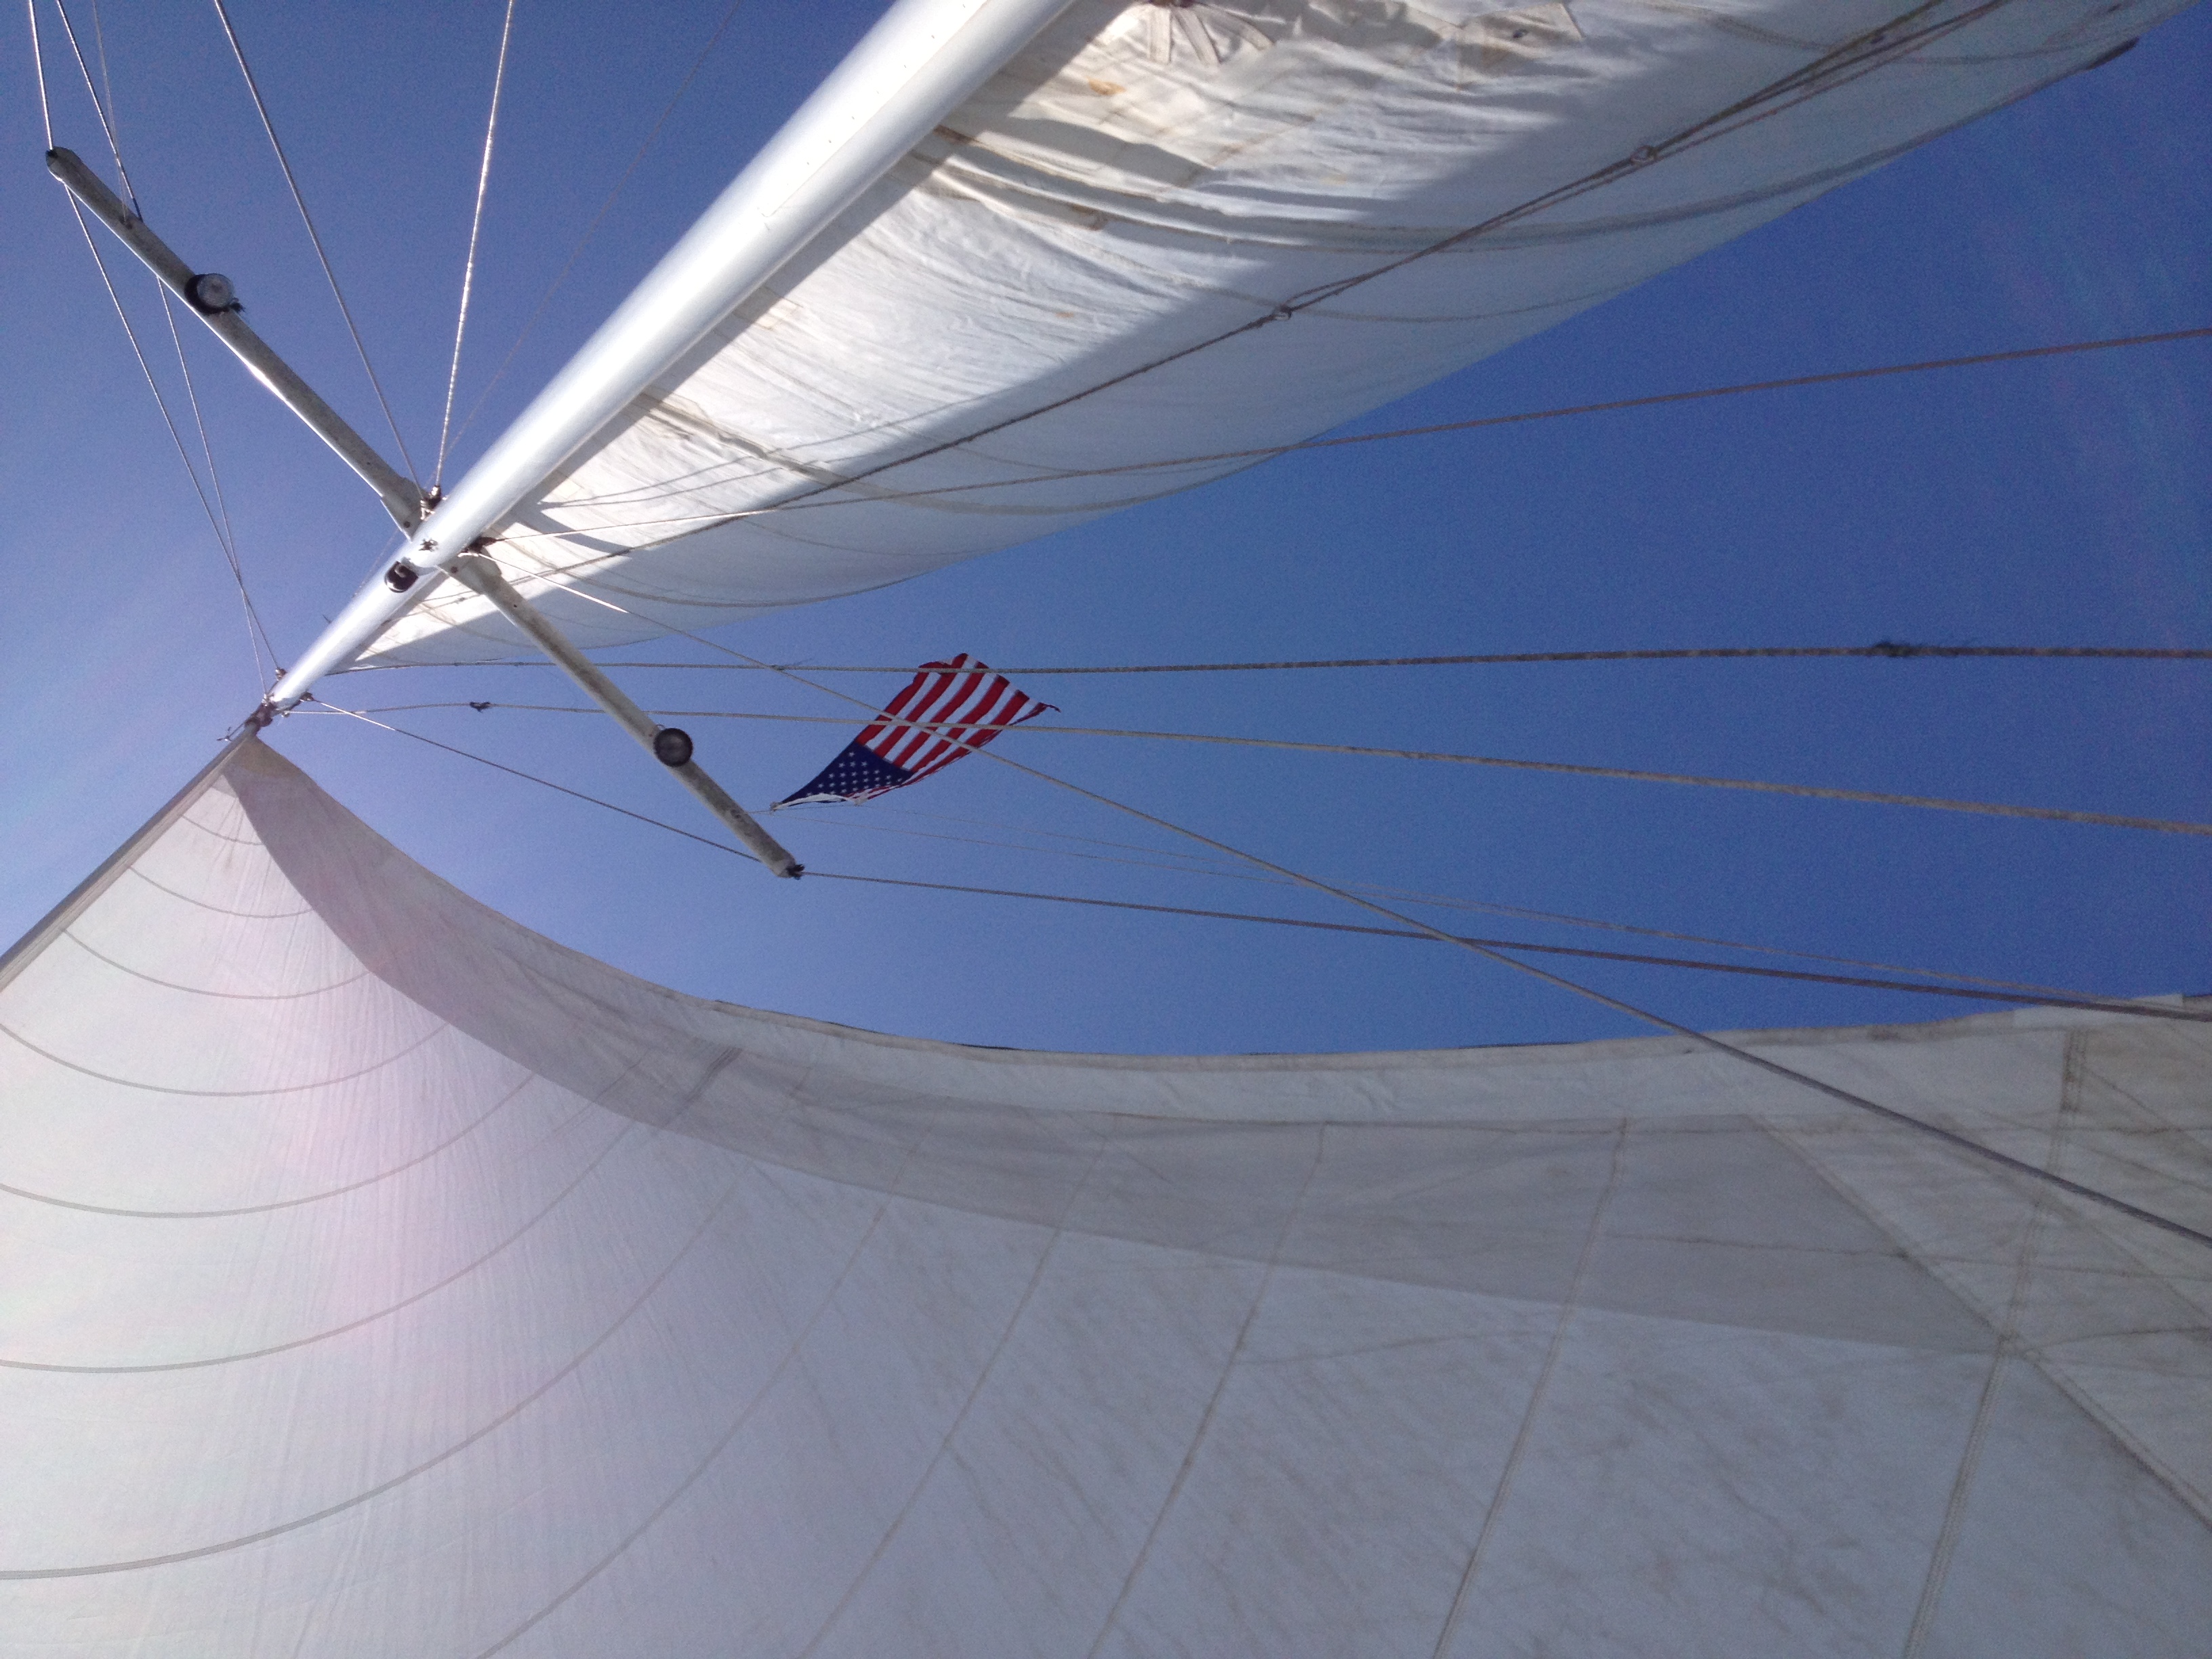 1979 Morgan 415 Out Island Ketch Sailboat for sale in St Petersburg, FL - image 10 